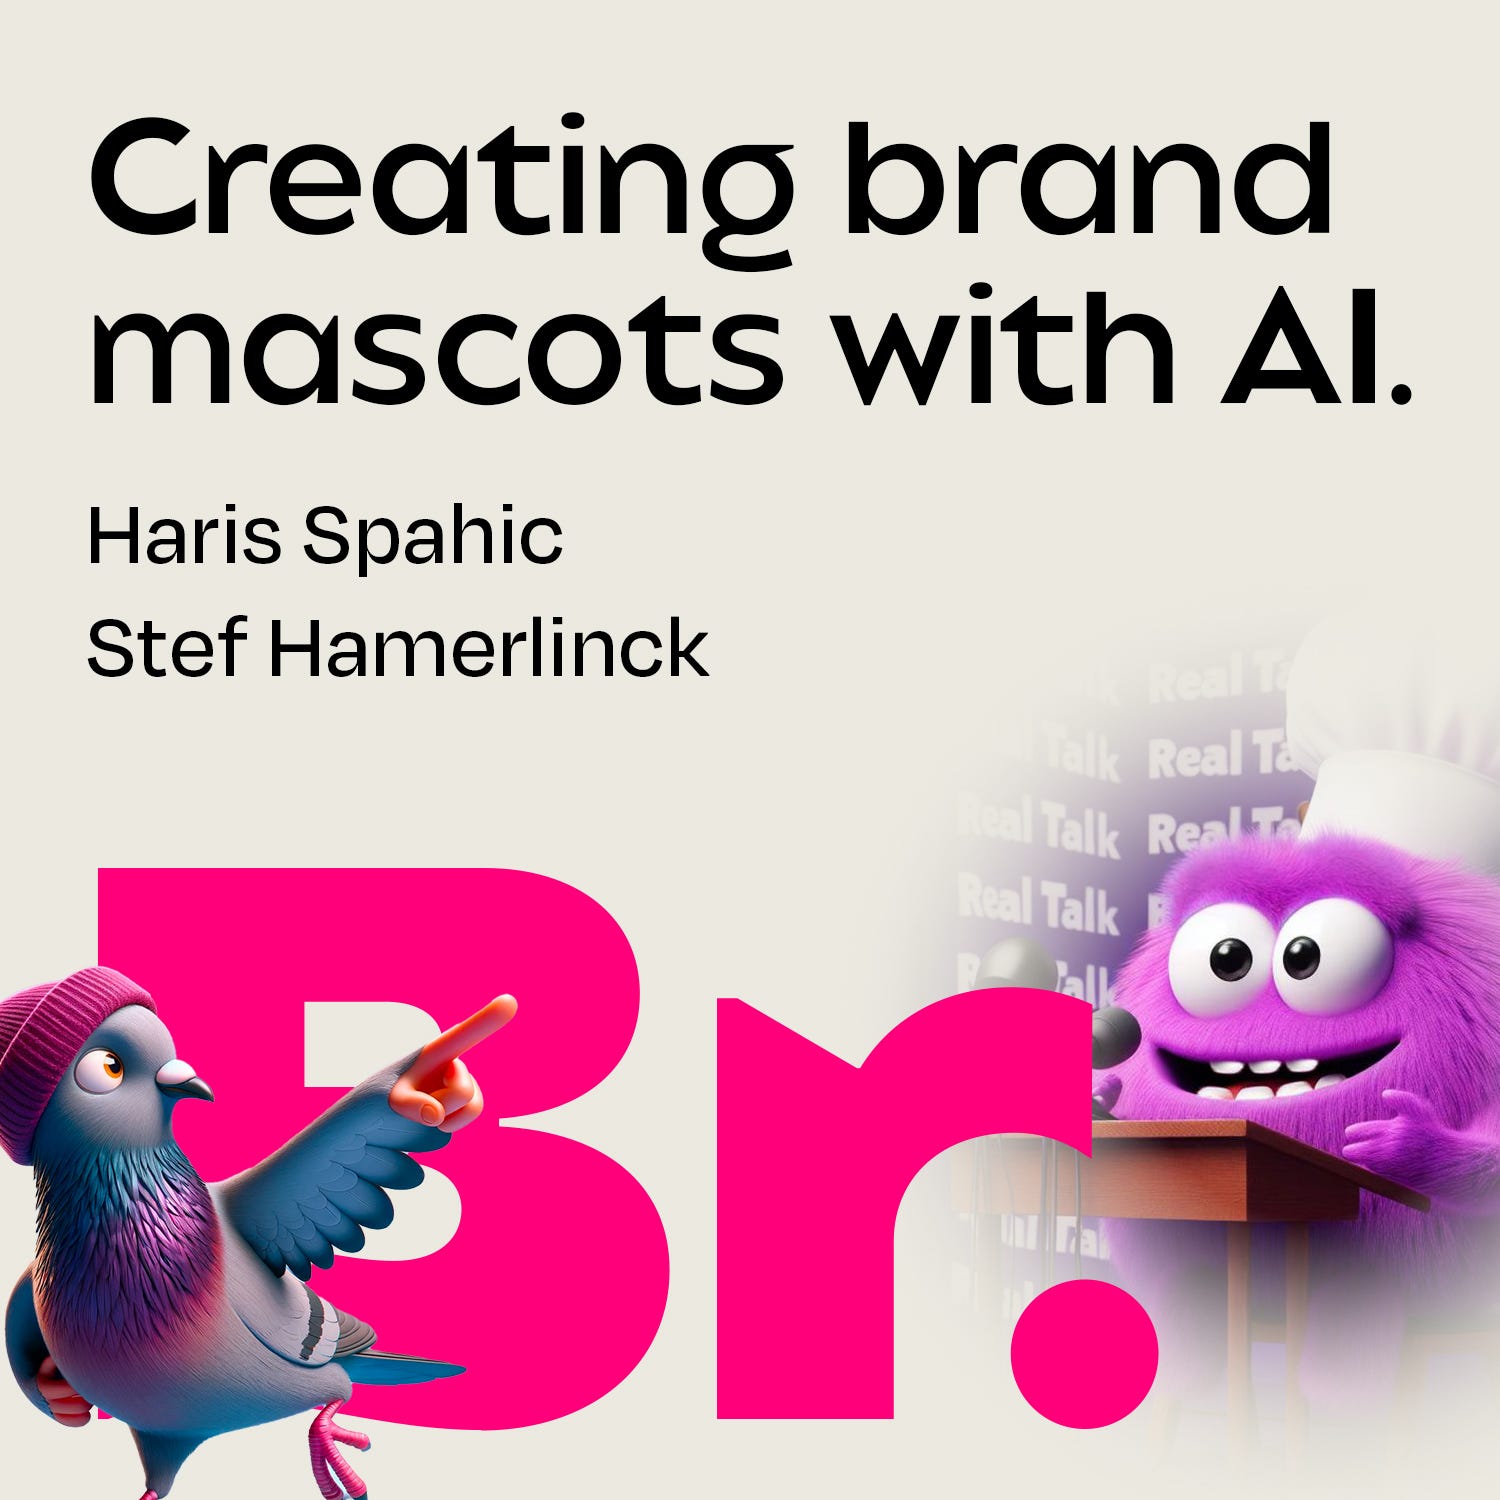 Creating brand mascots with AI